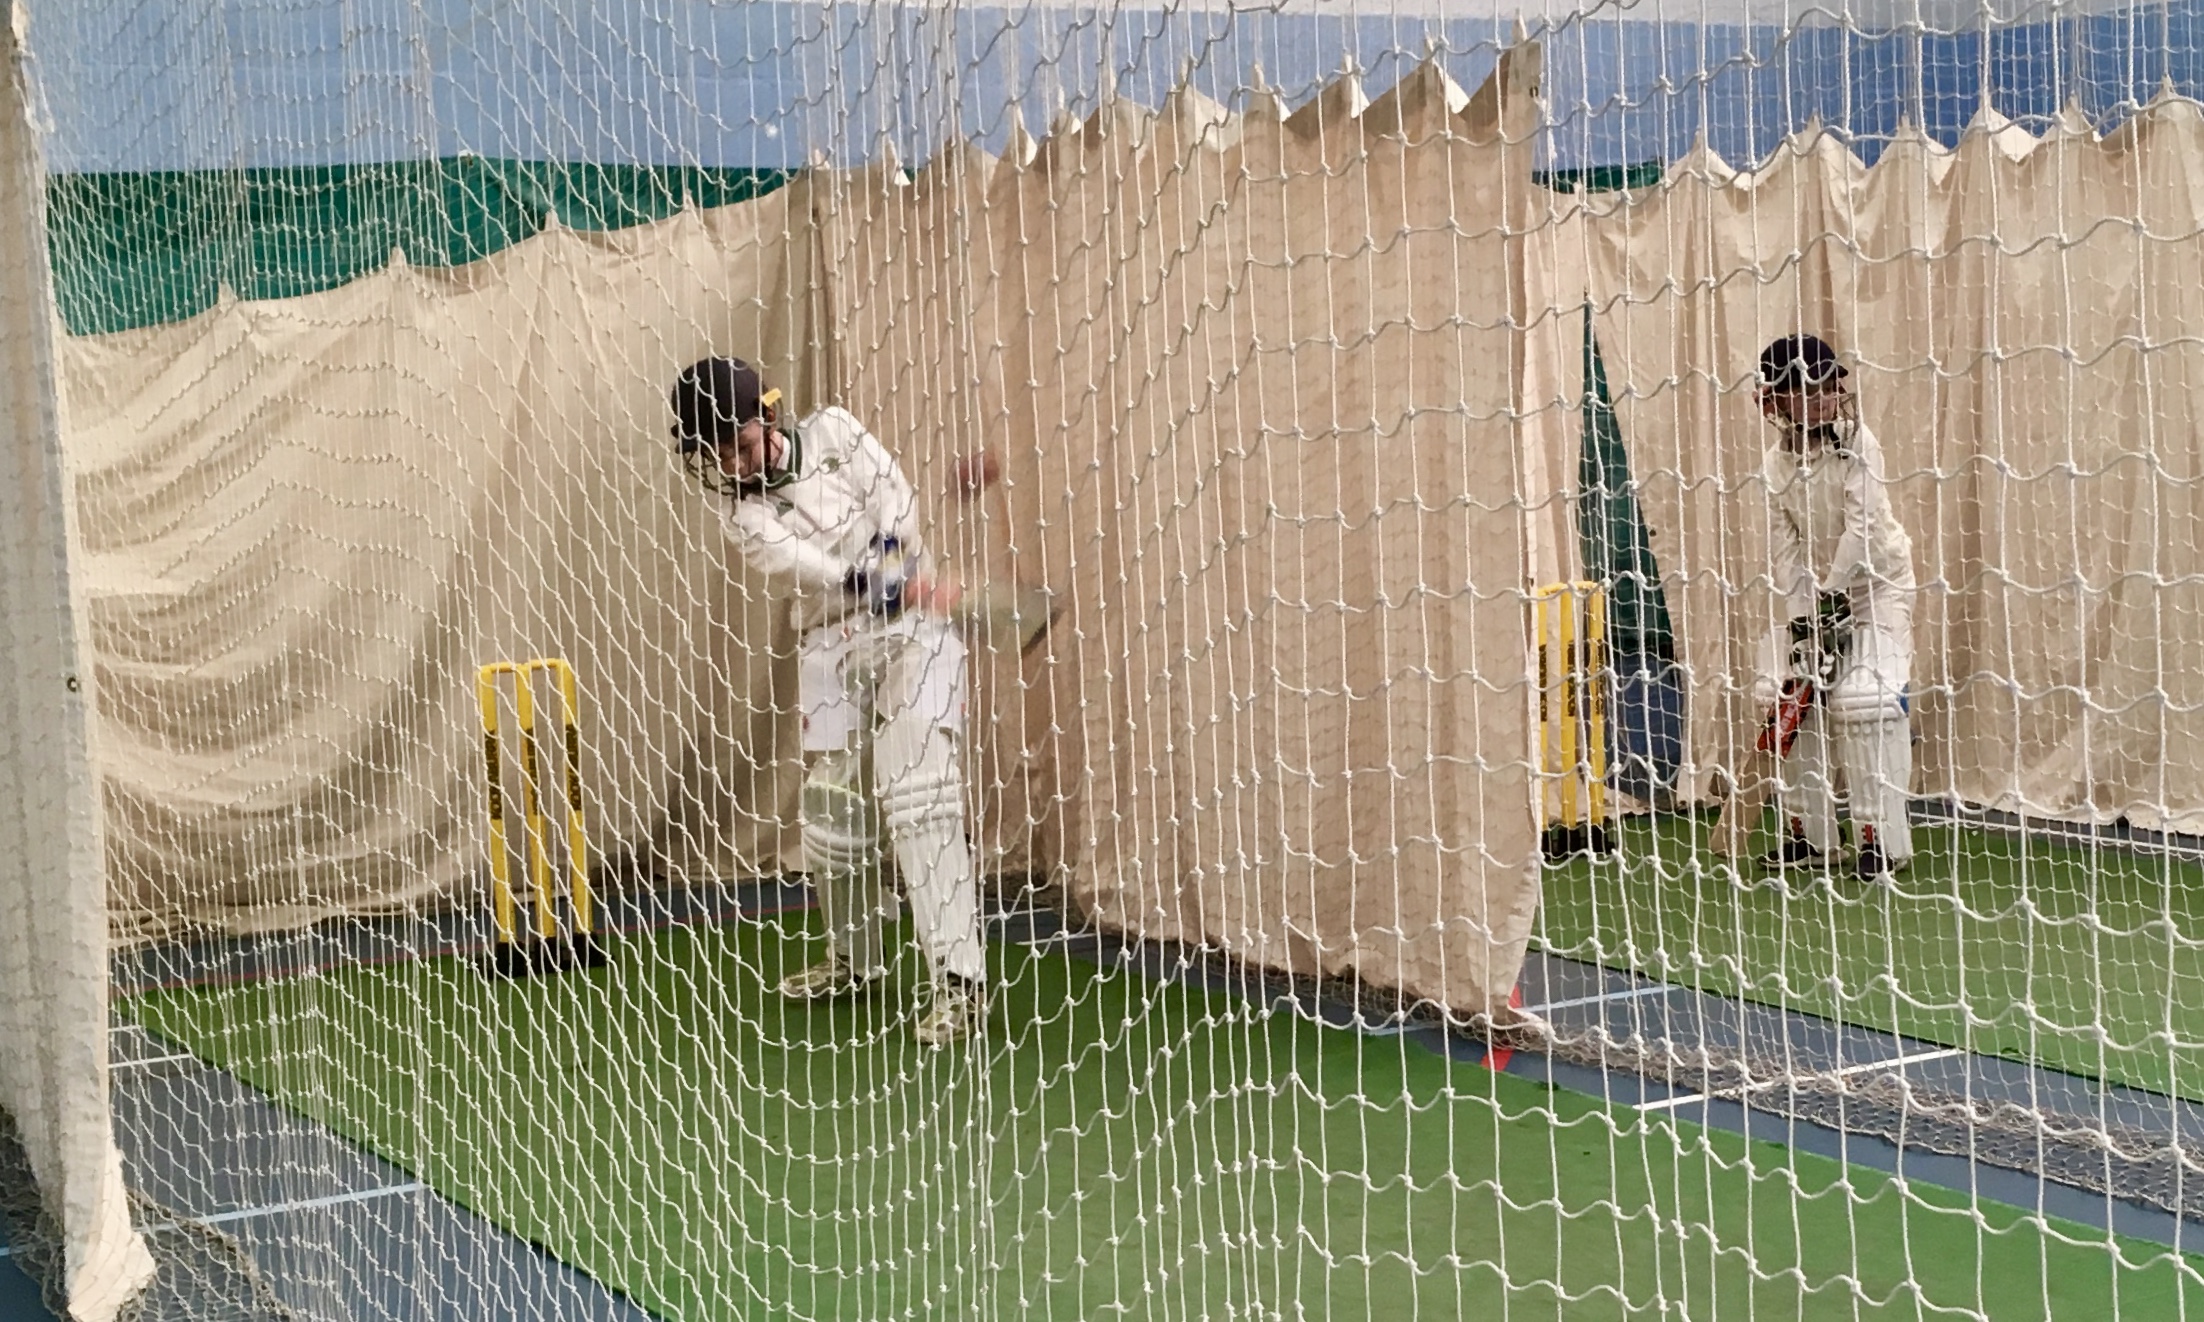 Young cricketers hitting the ball in the nets